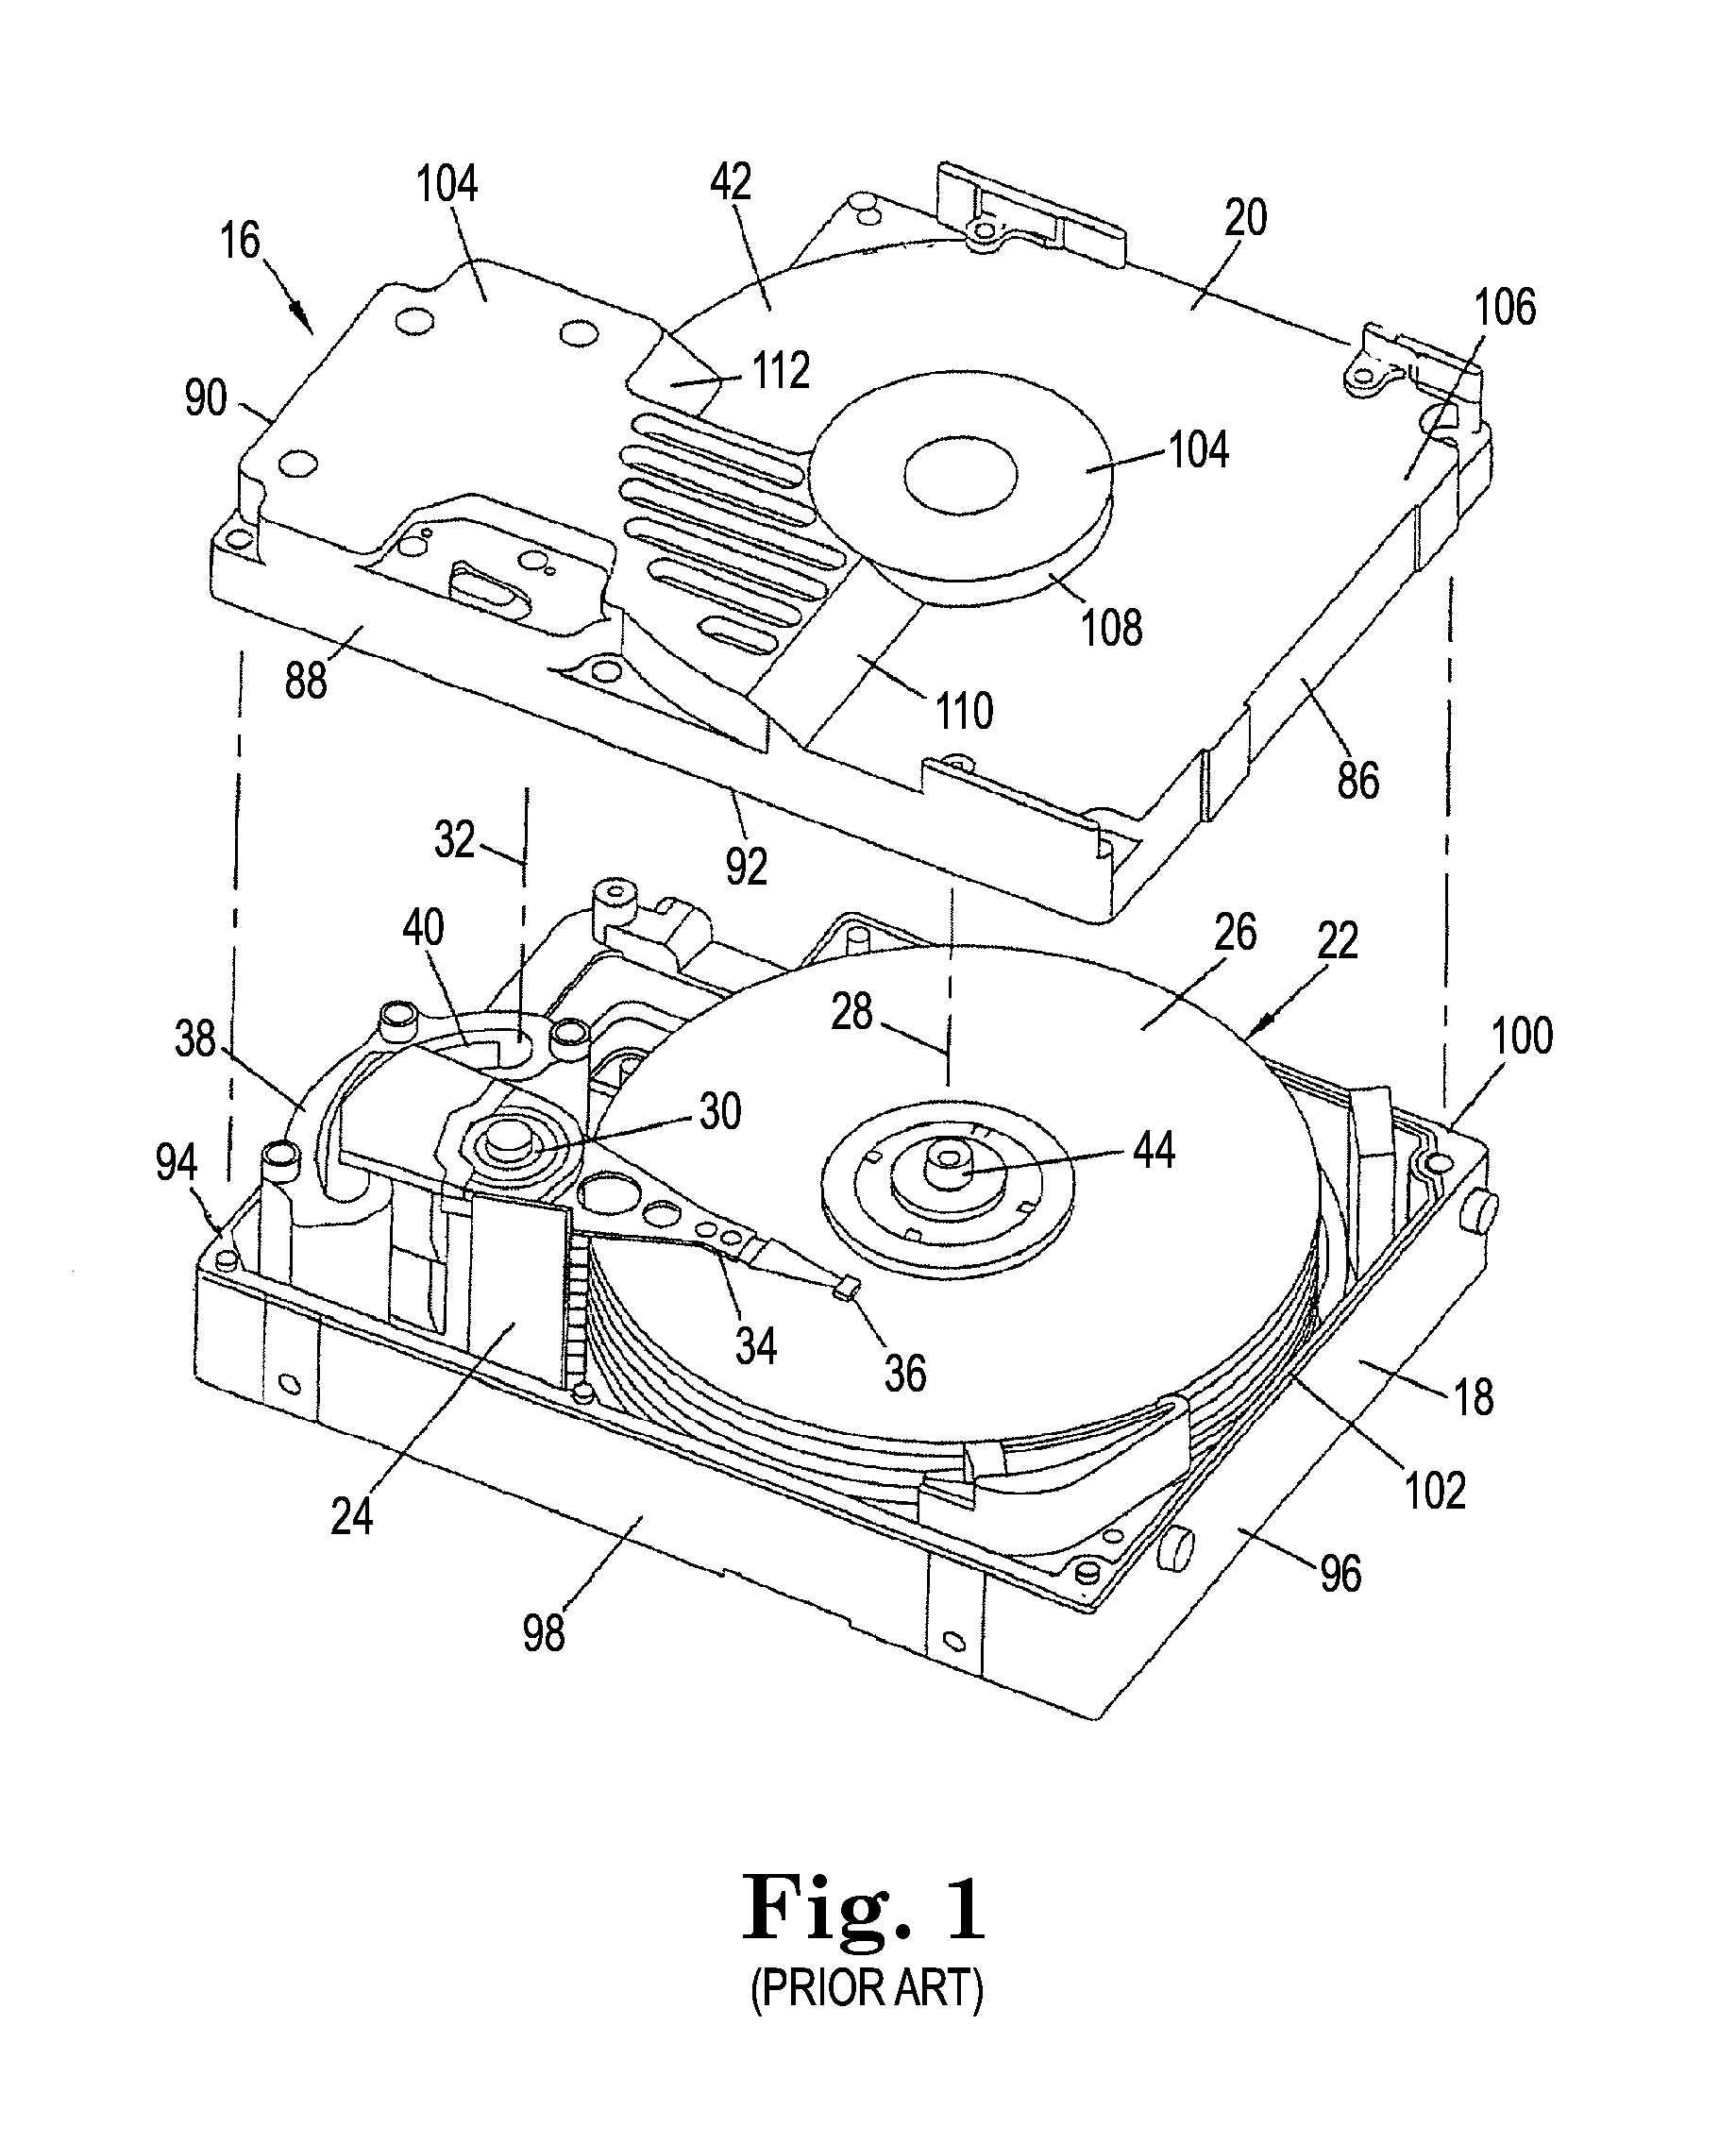 Metal-Coated Hard Disk Drives and Related Methods